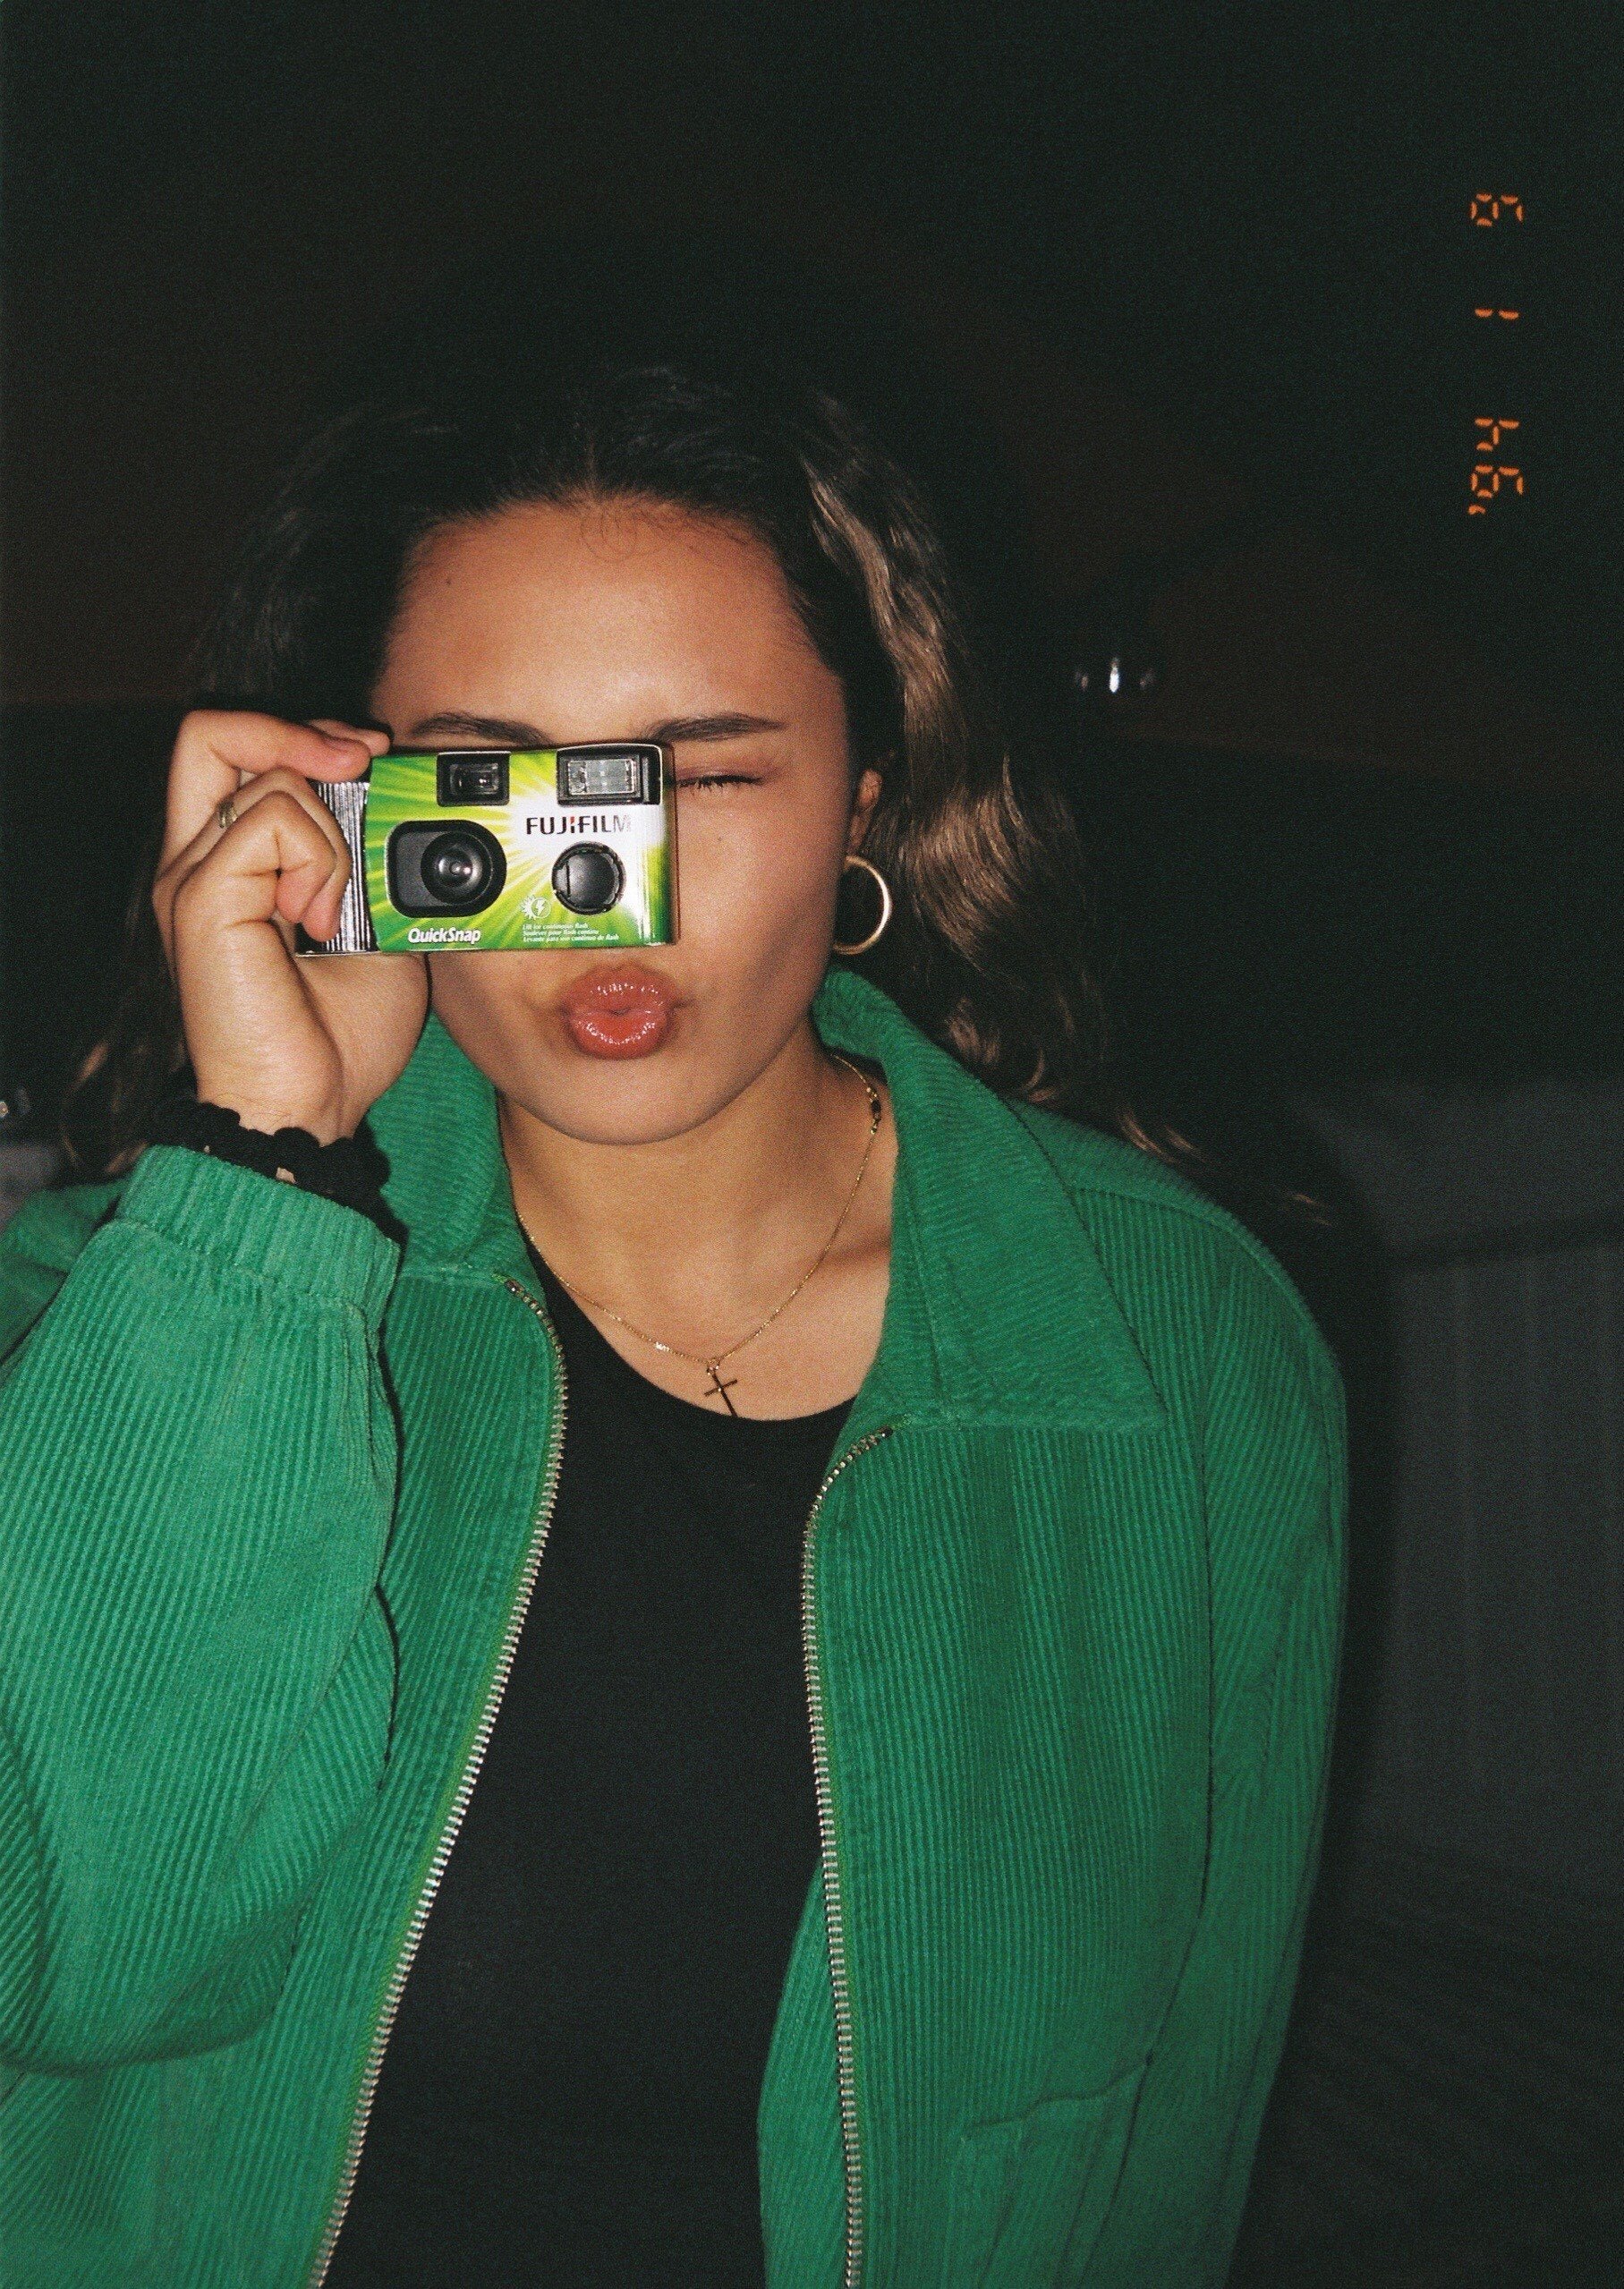 Disposable Camera Guide for 2021